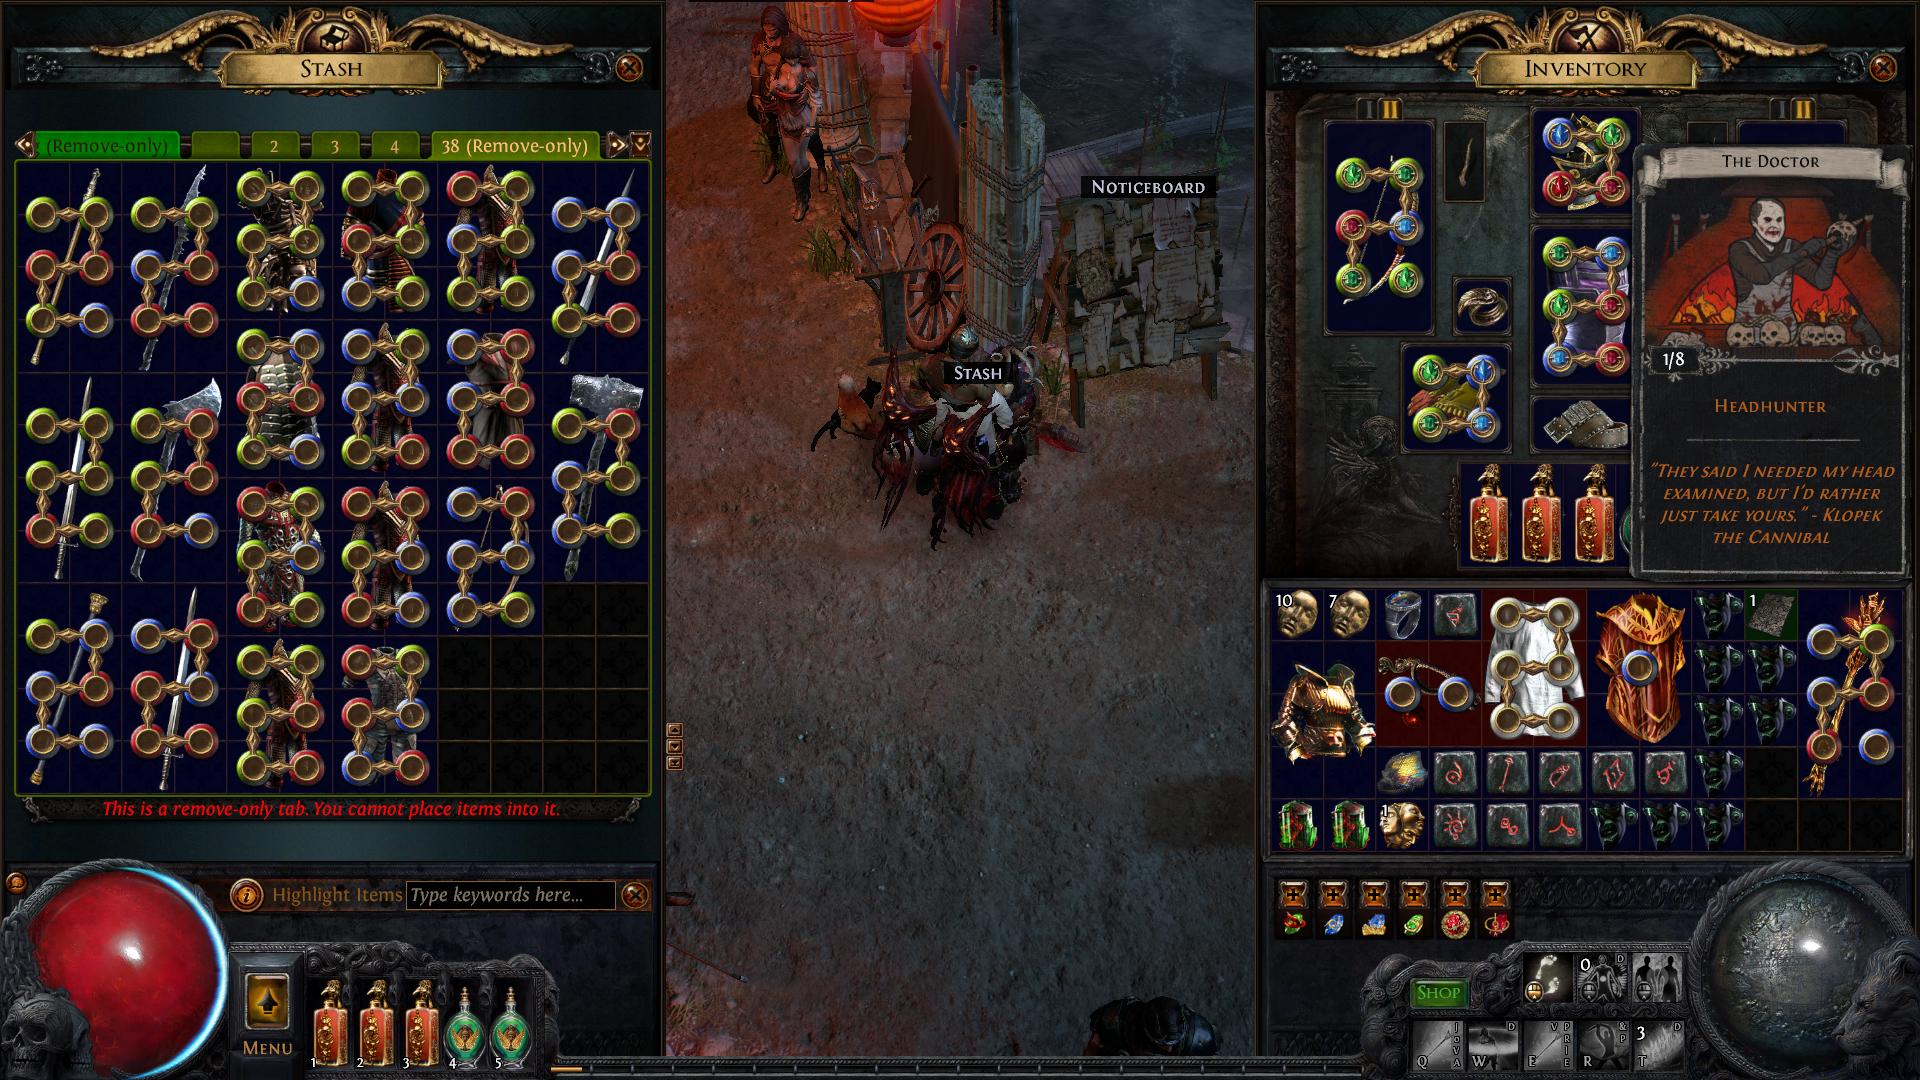 How To Get White Slots In Path of Exile (Kalandra Lake)